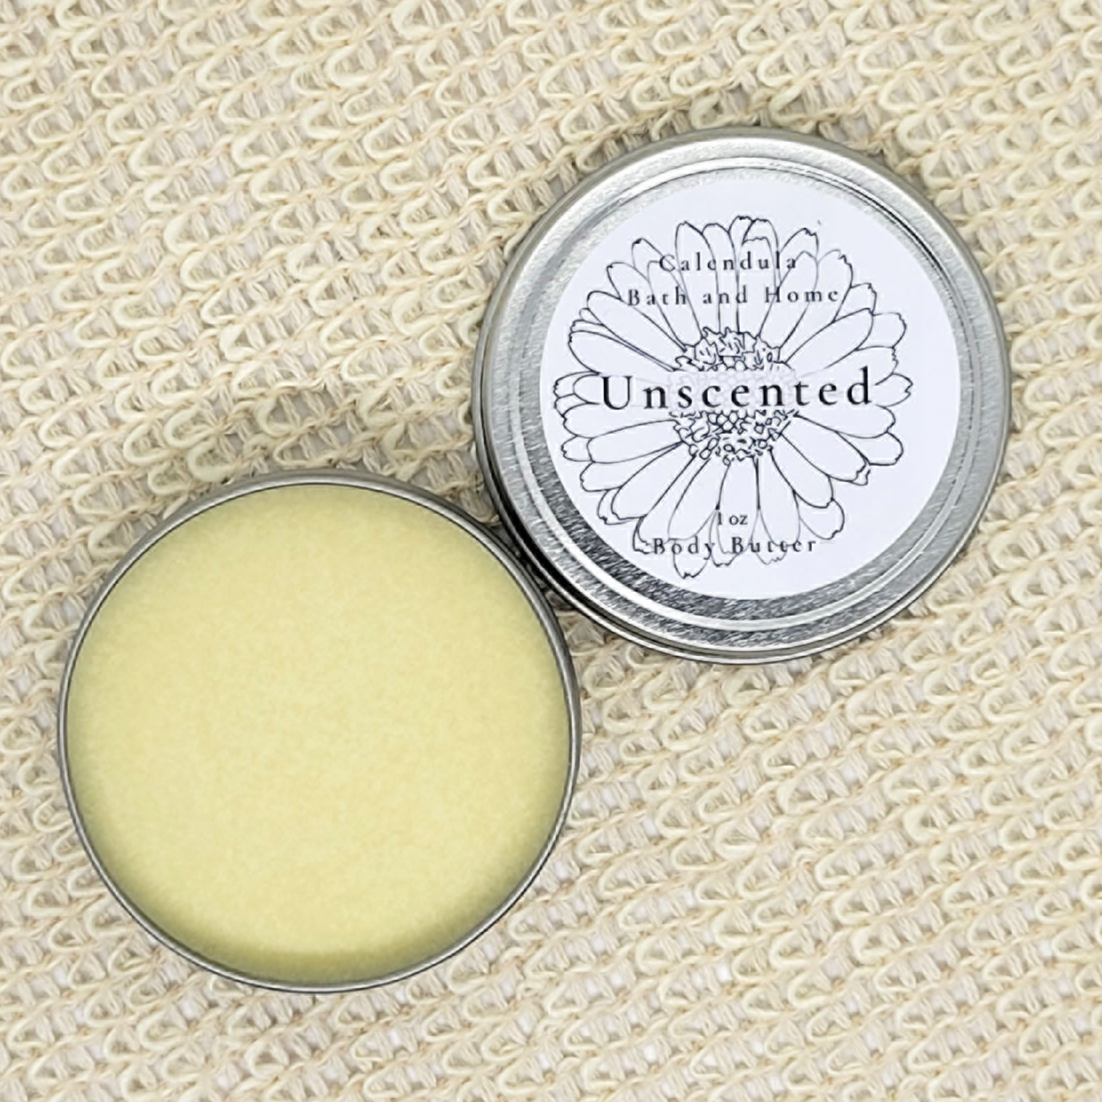 Gentle unscented body butter for sensitive skin